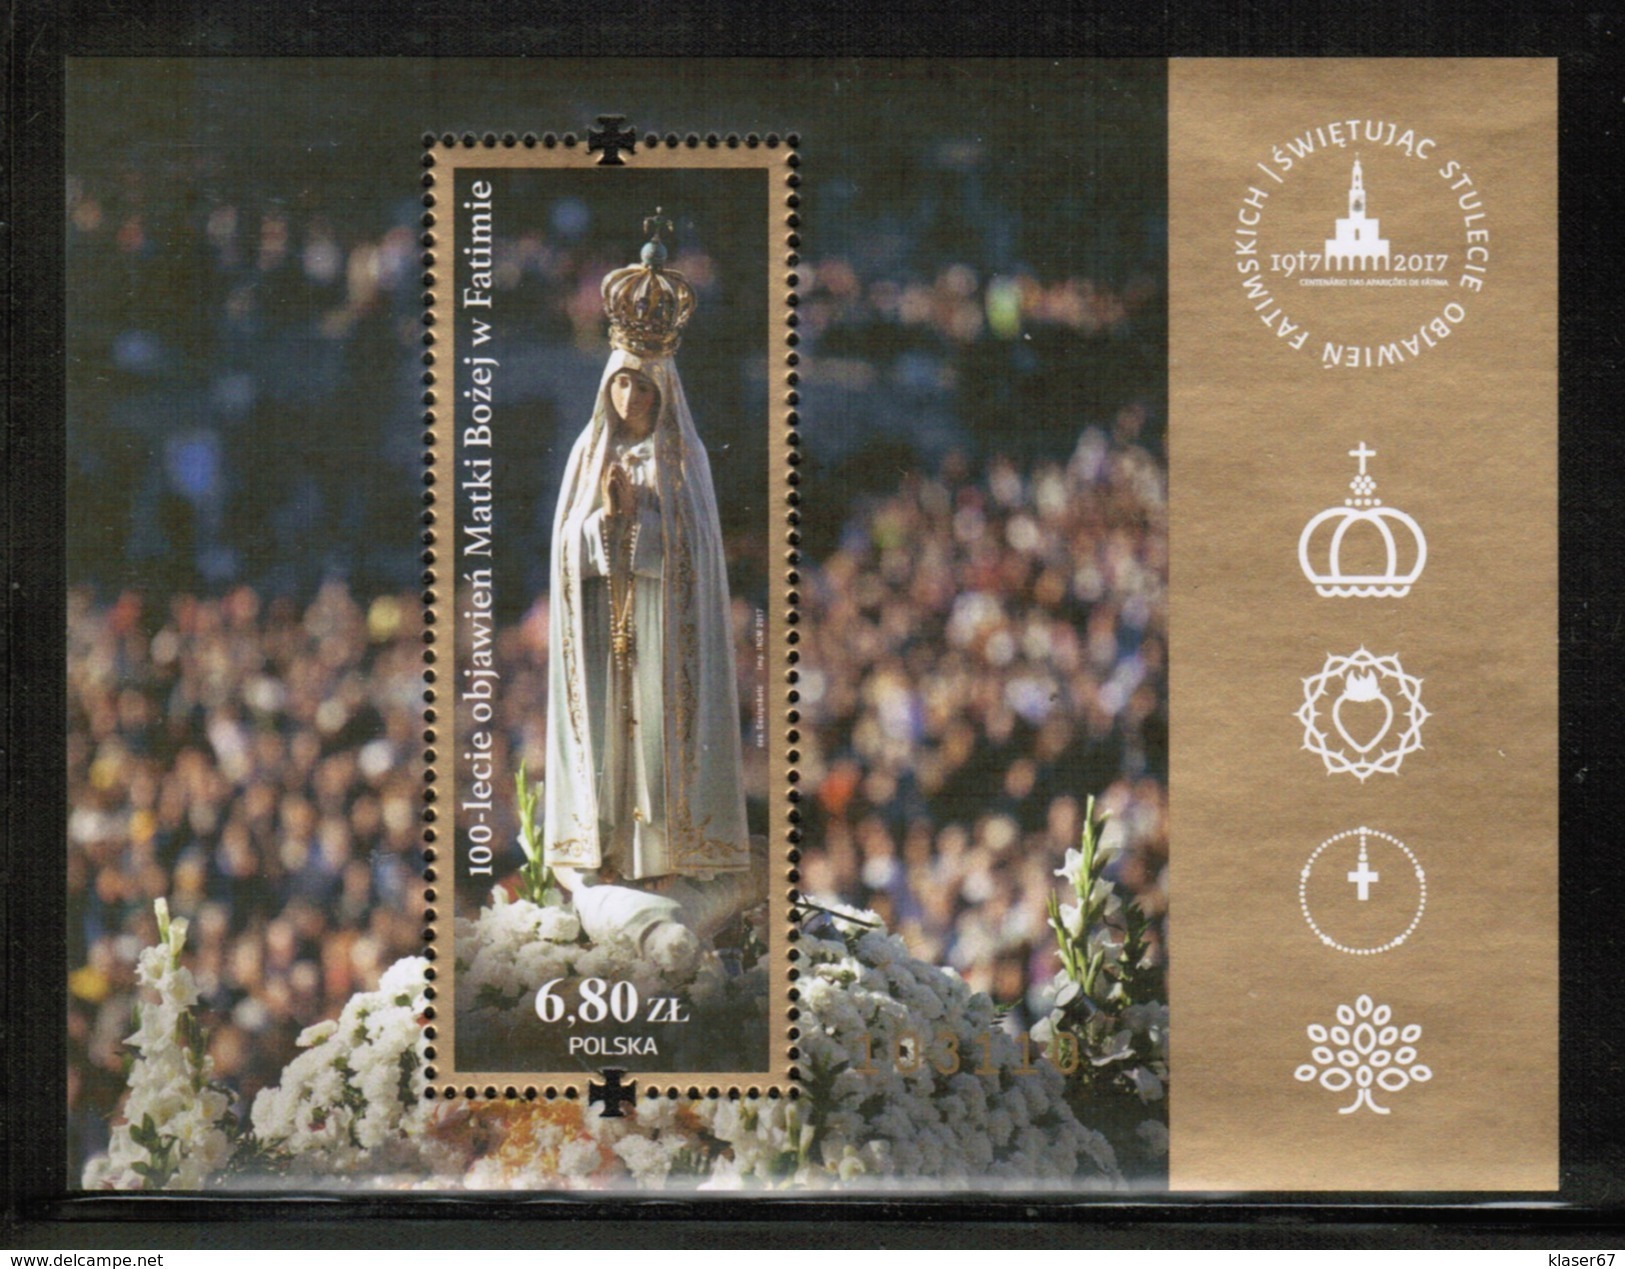 PL 2017 MI BL 260 100 Years Of Our Lady Of Fatima Apparitions (joint Issue Poland, Luxembourg, Portugal, Slovakia) ** - Blocks & Kleinbögen